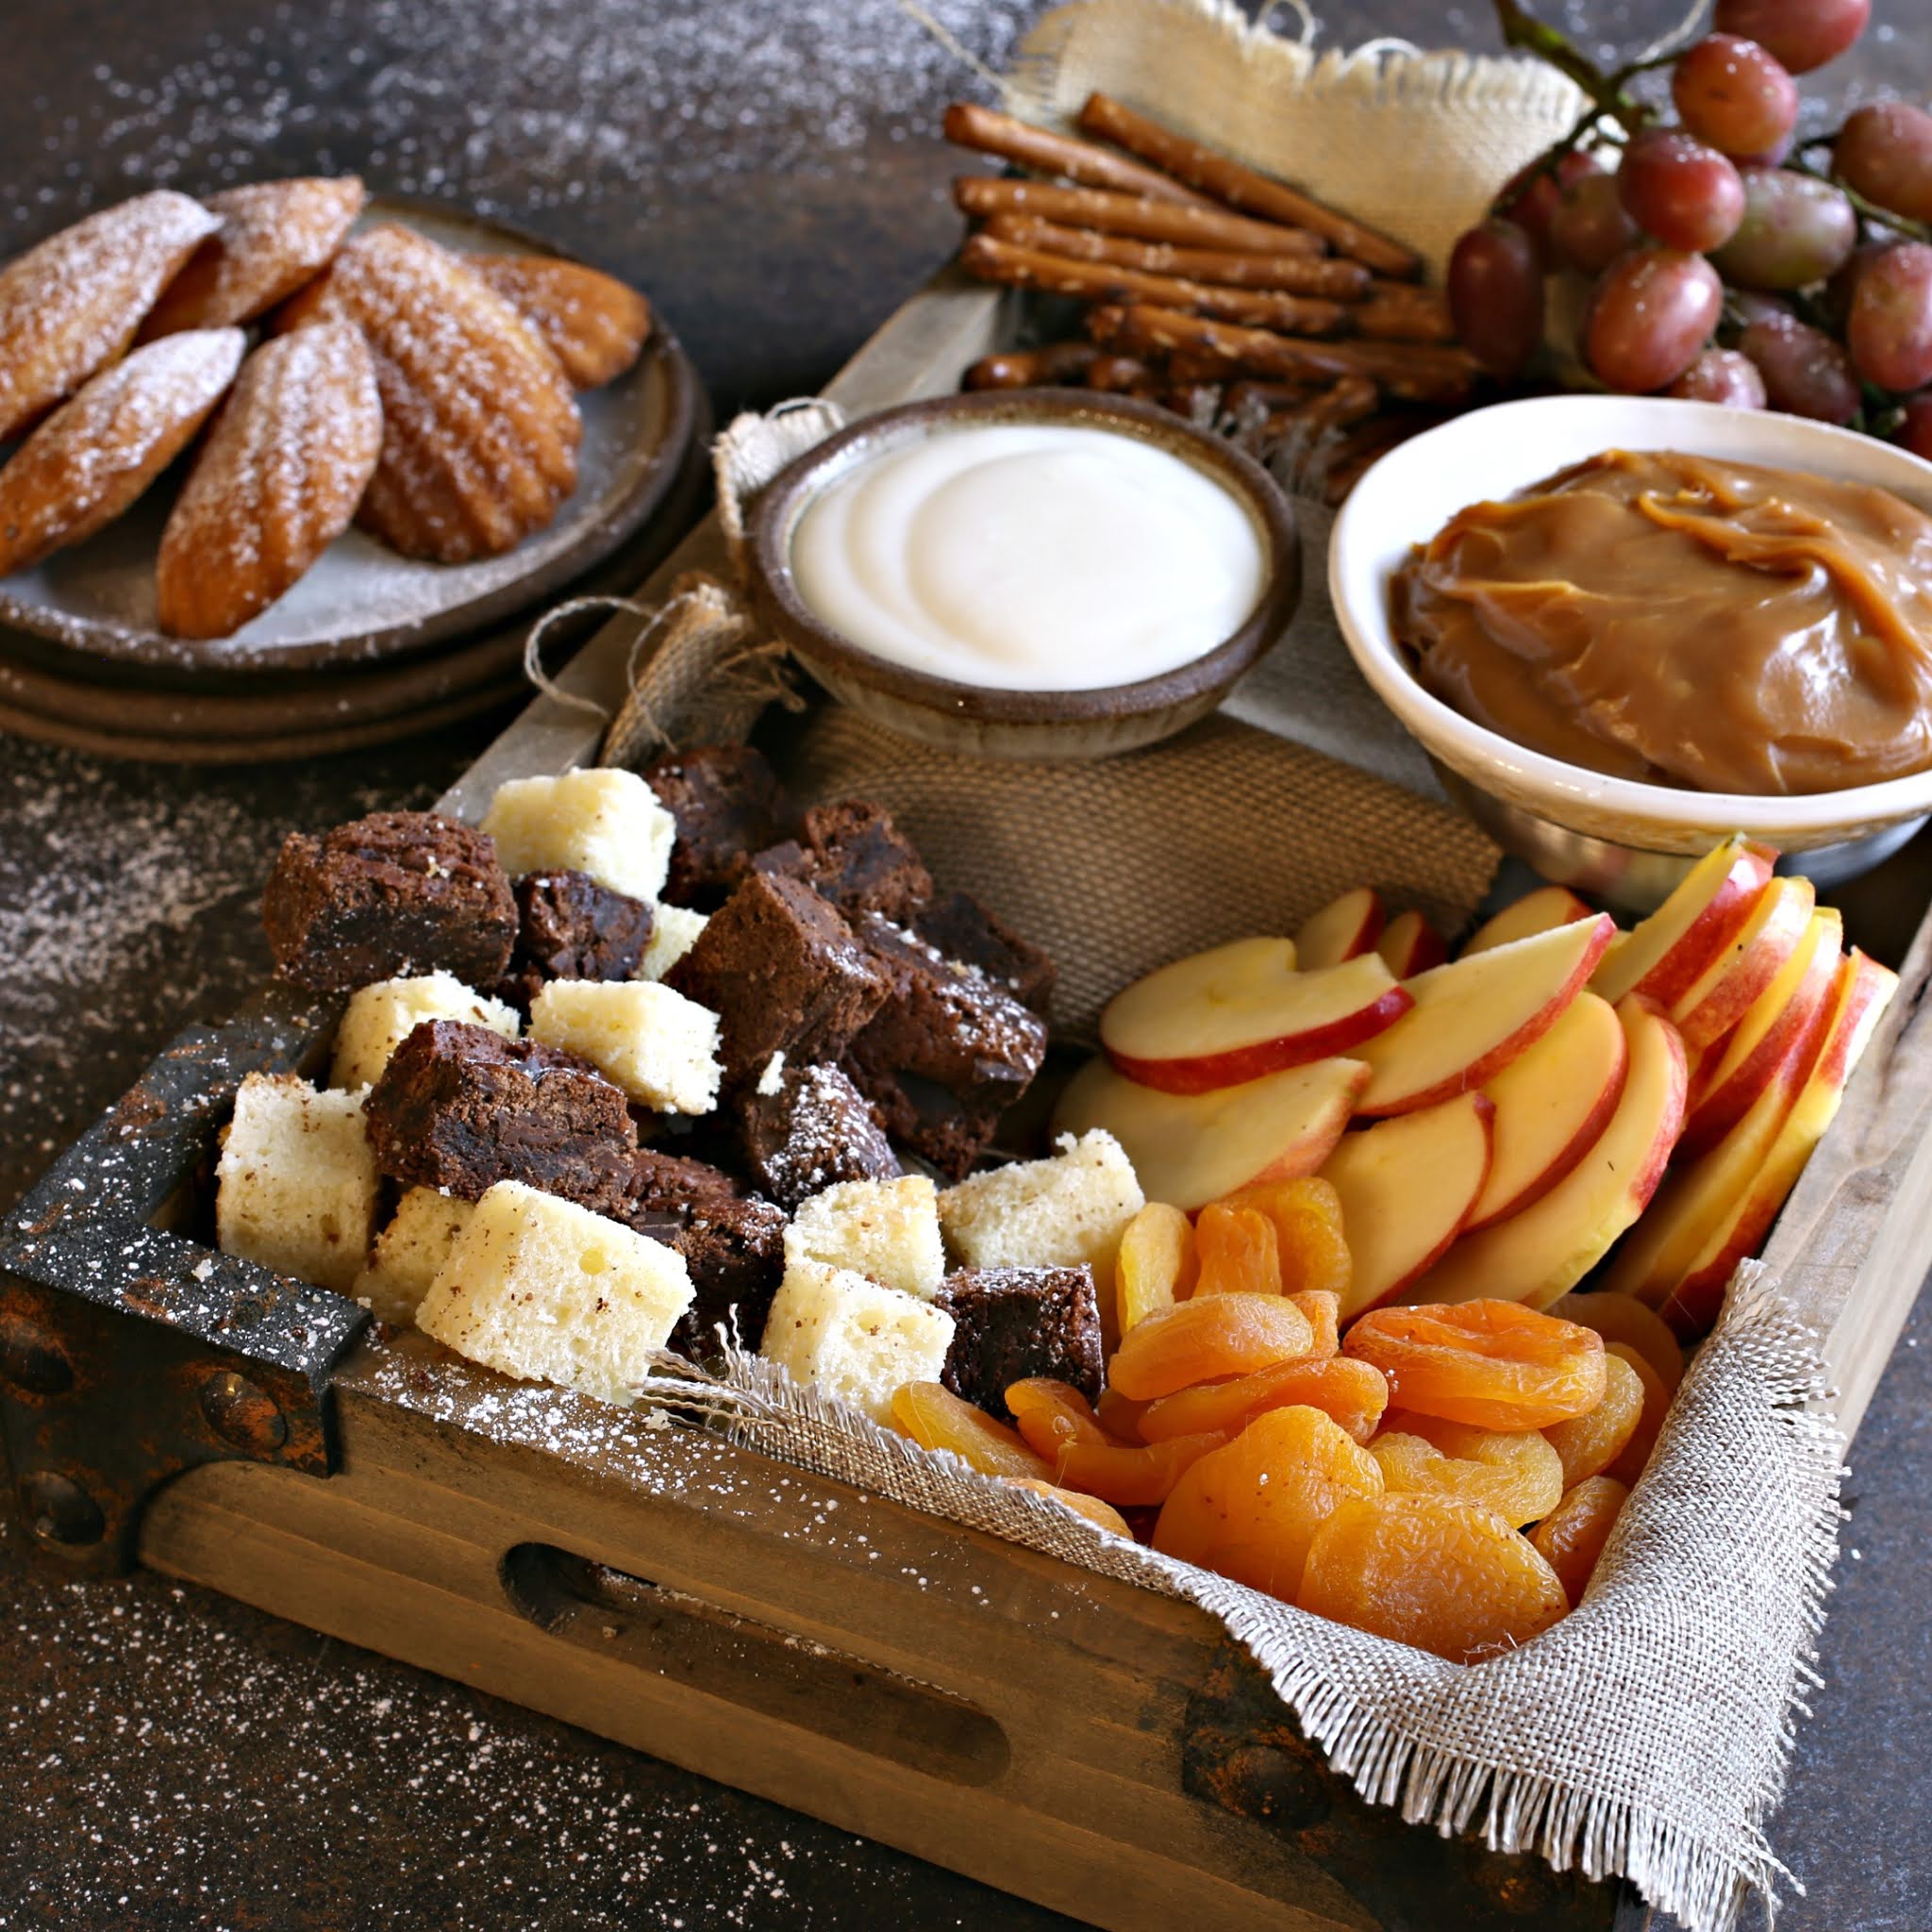 Recipe for creating a dessert treat board with cubes of cake, cookies, fresh fruit, dried fruit and sweet caramel and yogurt dips.